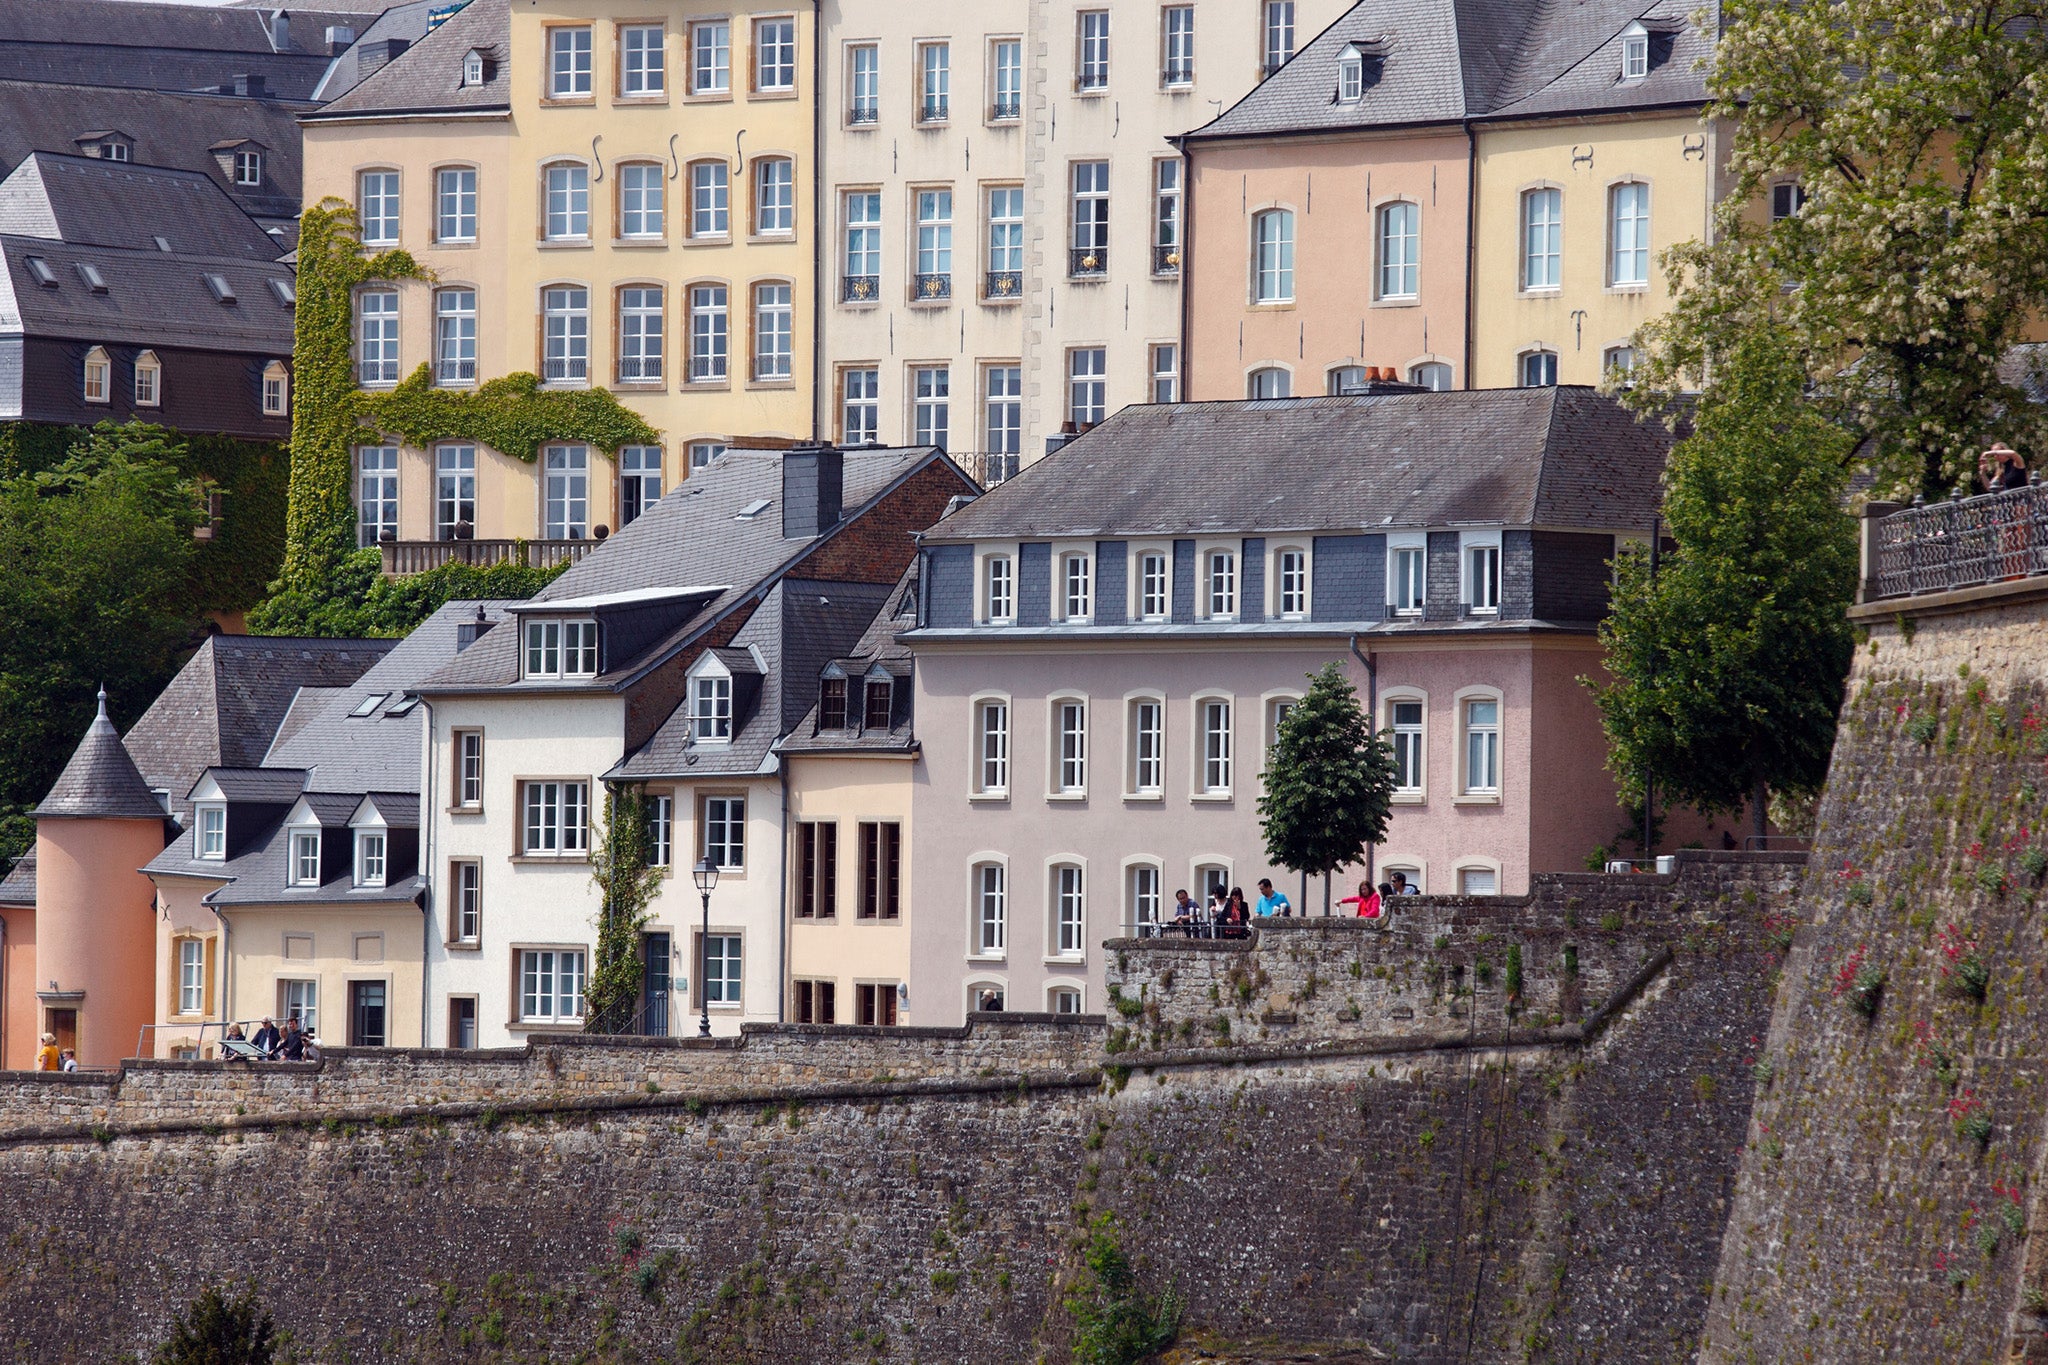 18. Luxembourg